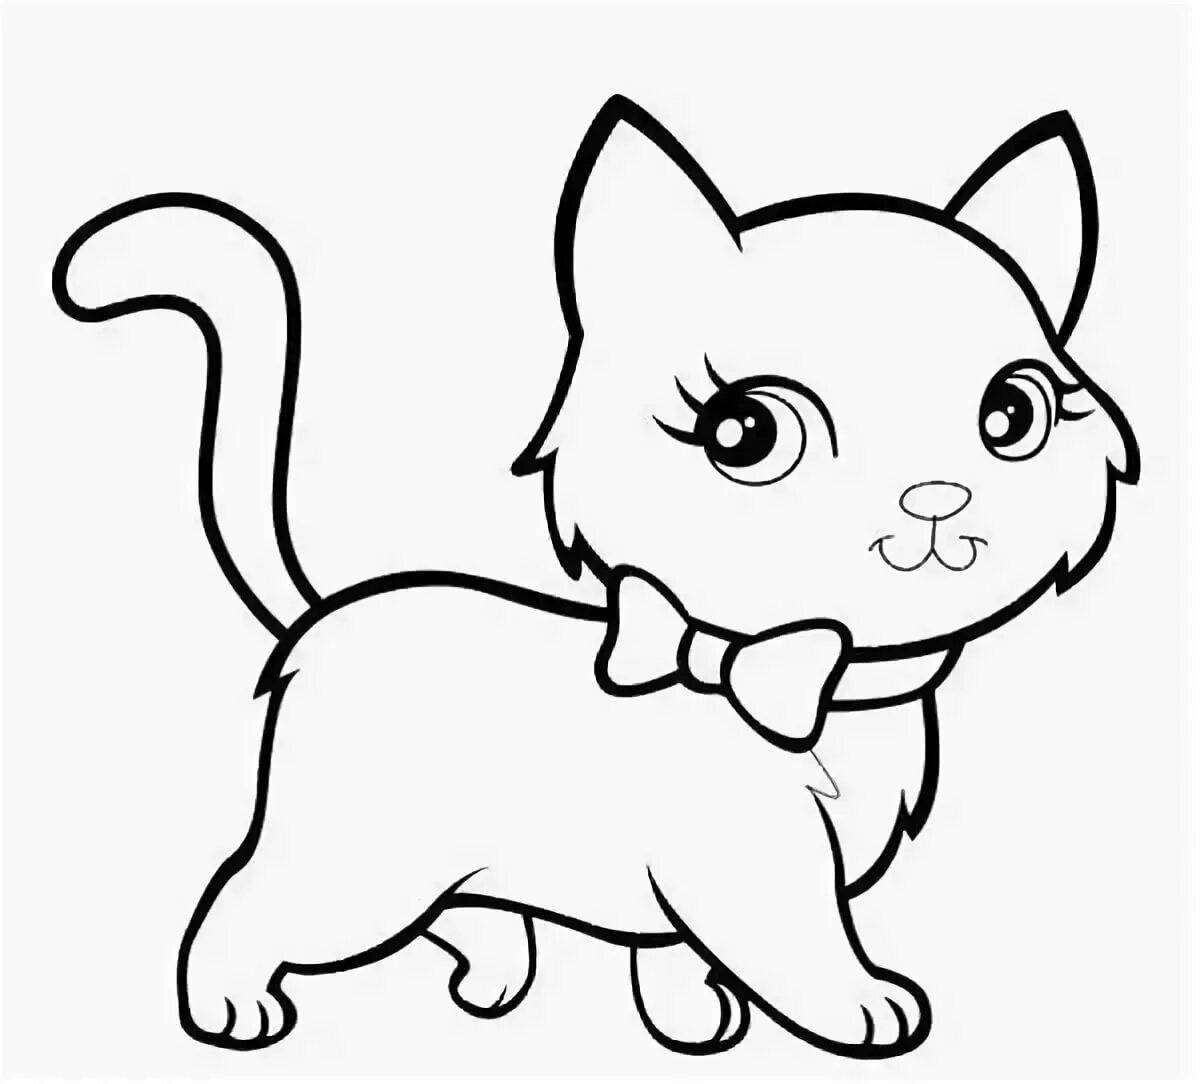 Fun coloring kitty for children 5-6 years old